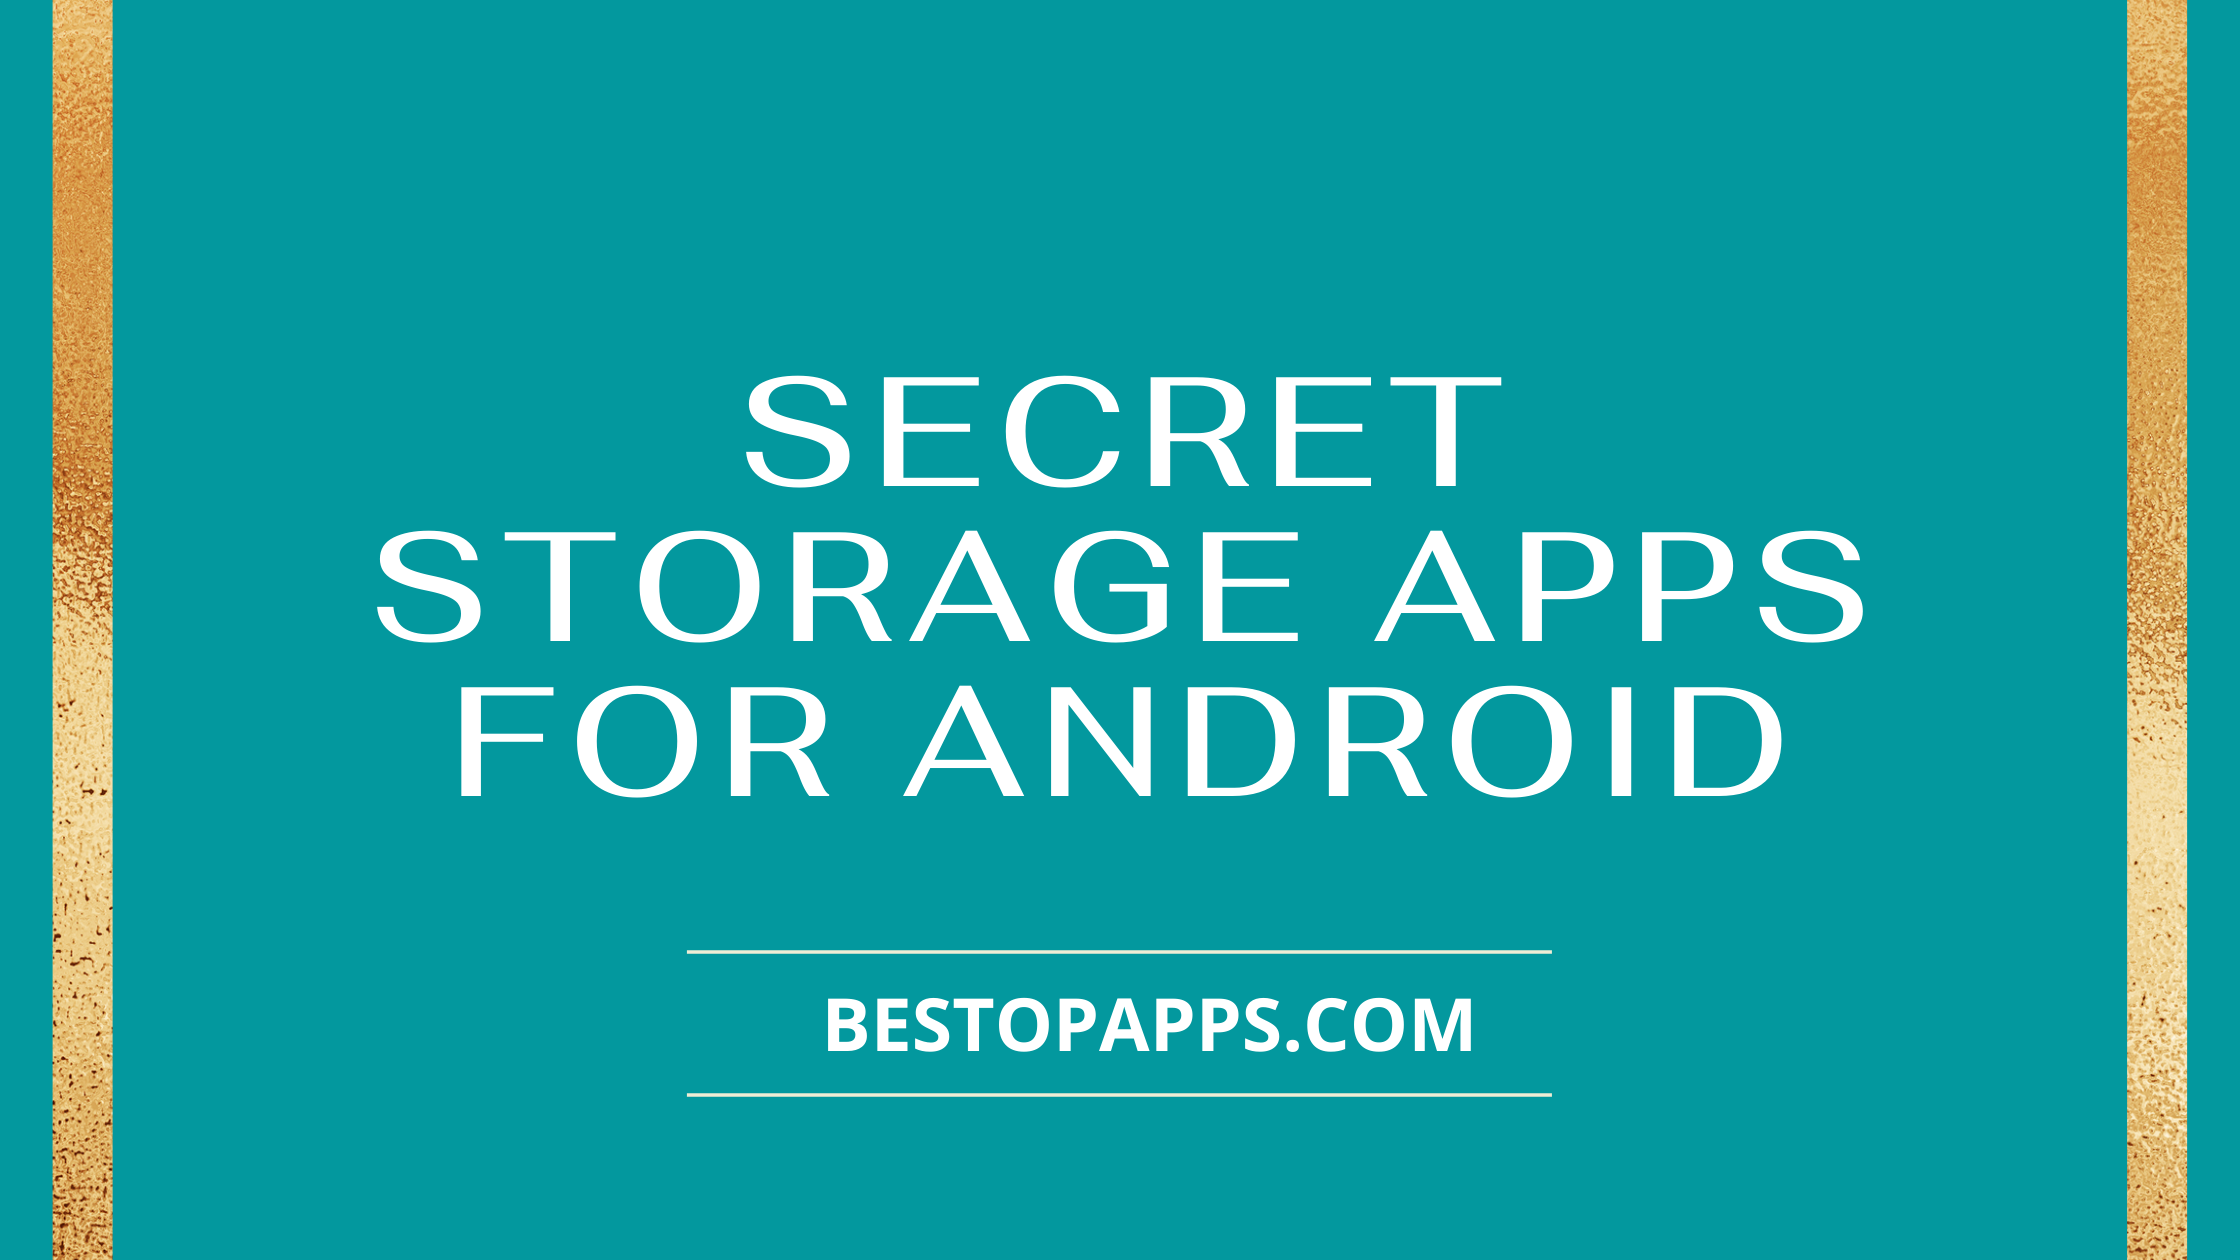 Secret Storage Apps for Android